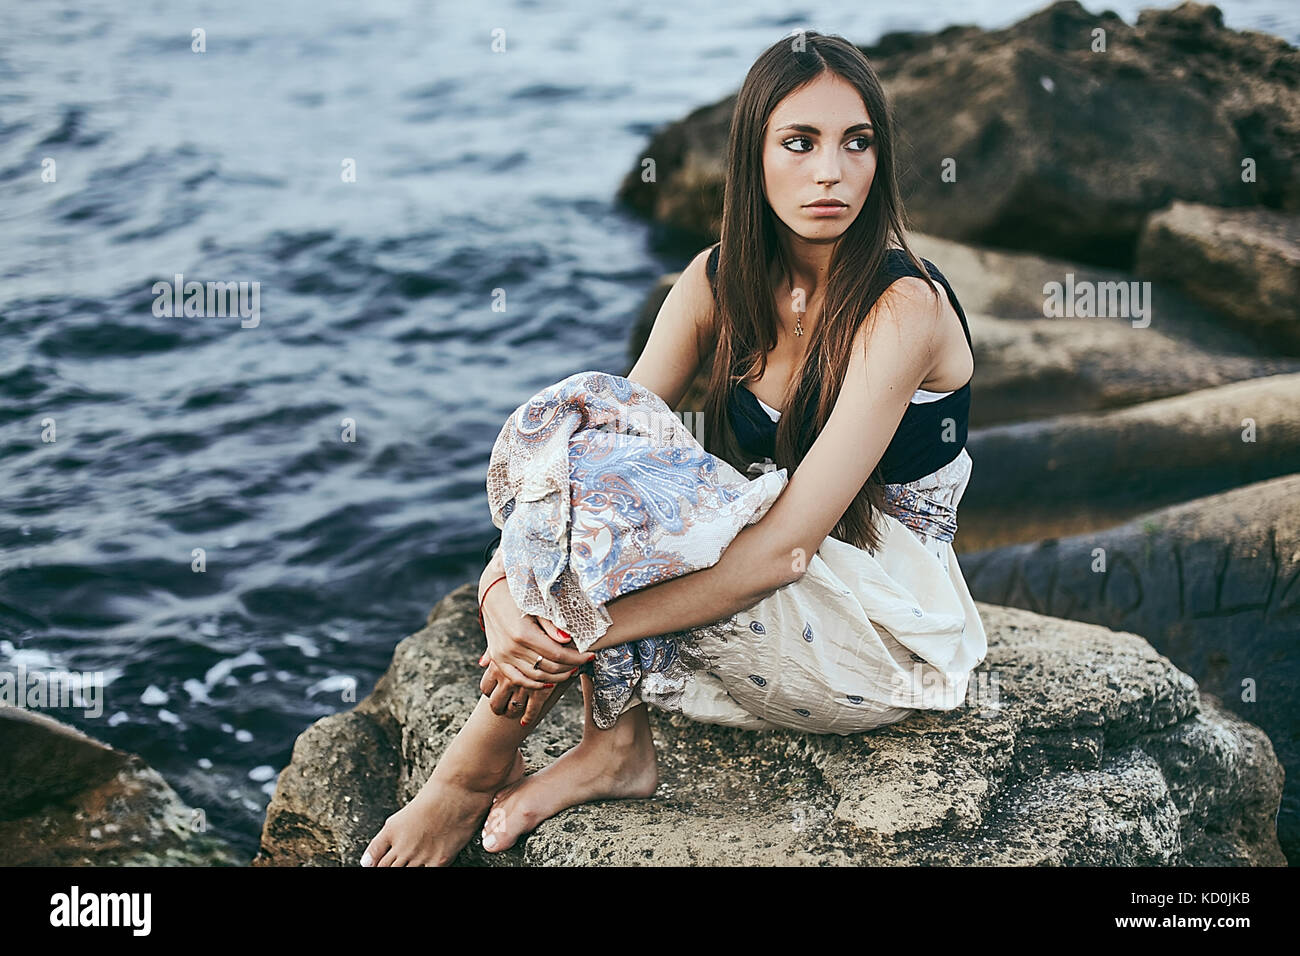 Young woman sitting on coastal rock looking over her shoulder, Odessa, Ukraine Stock Photo